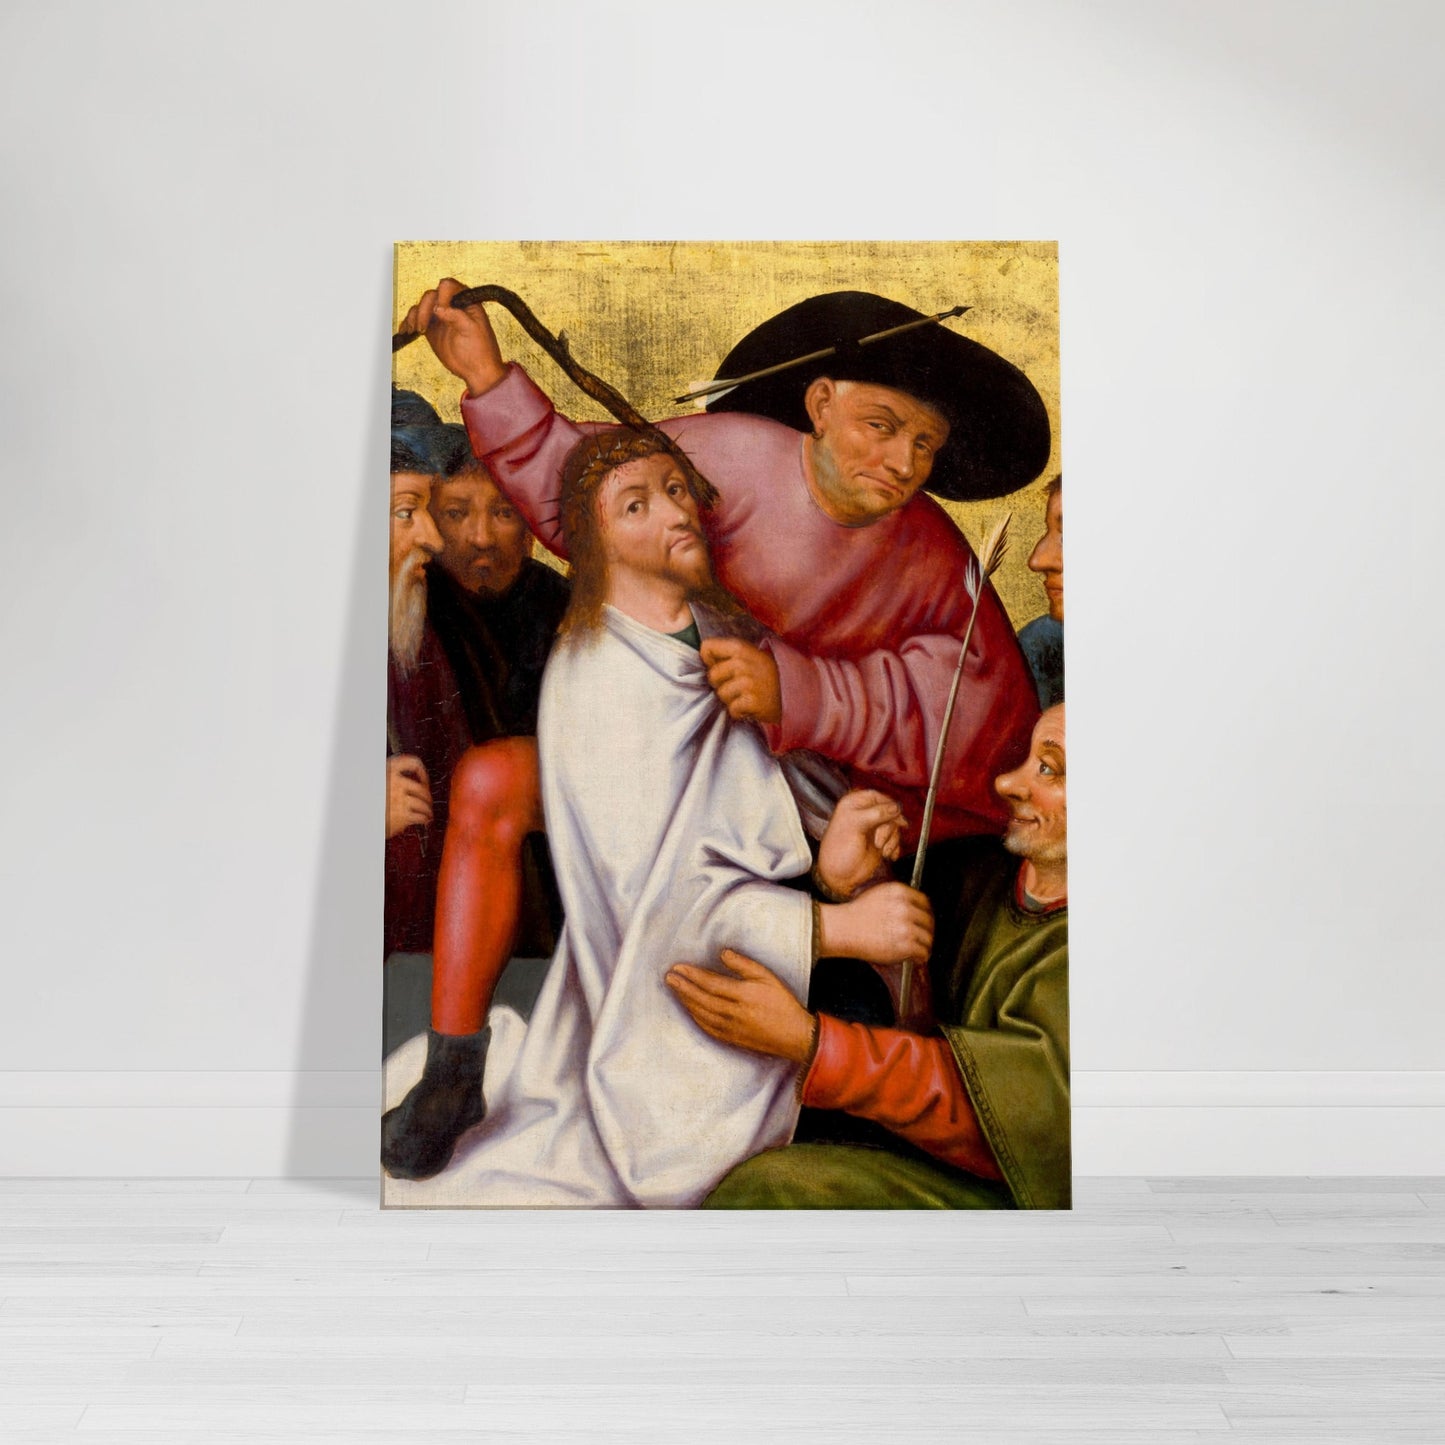 HIERONIM BOSCH - CHRIST CROWNED WITH THORNS - CANVAS ART PRINT